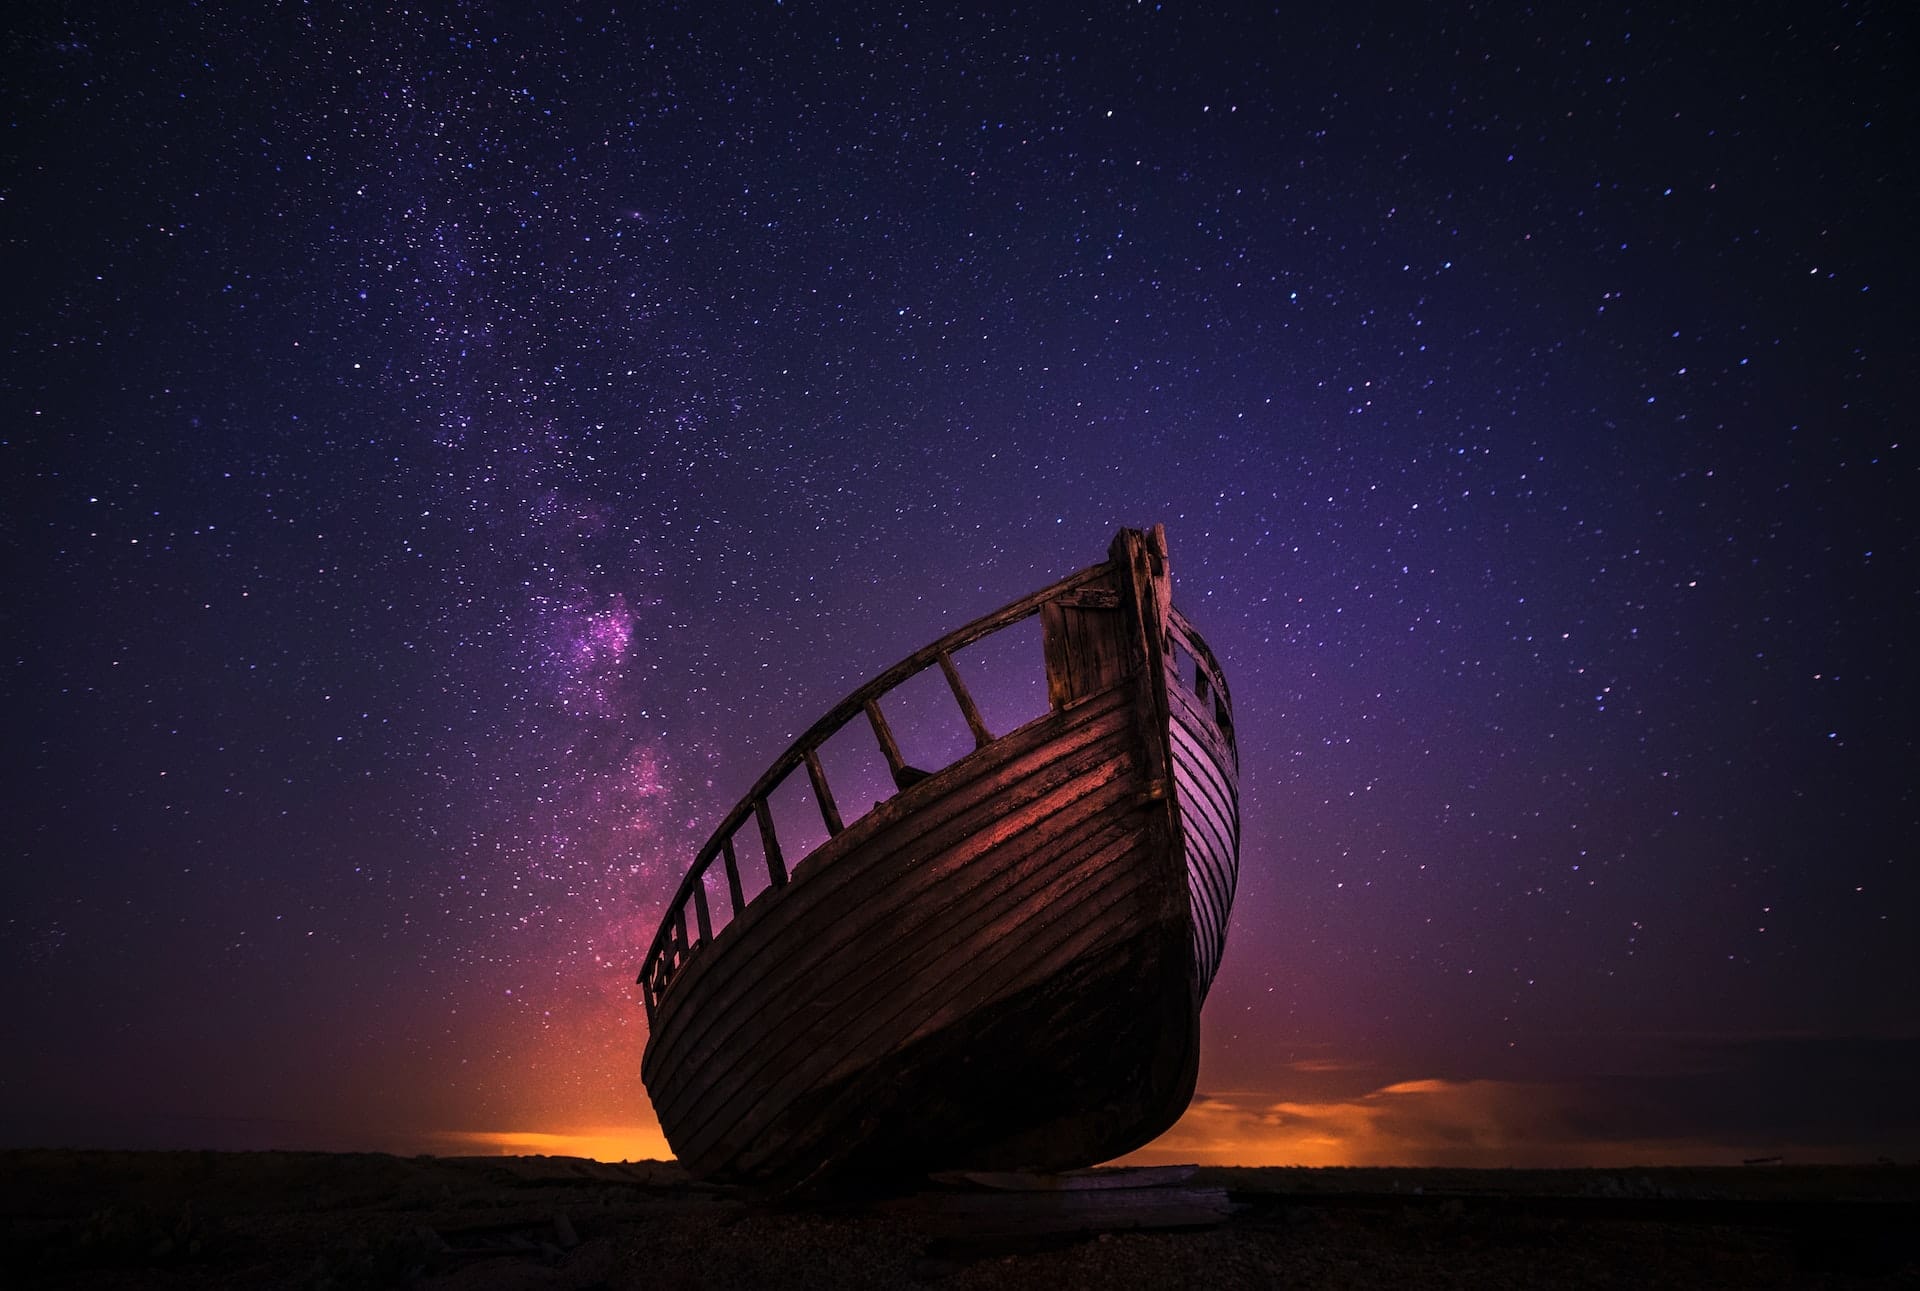 wooden boat under a night sky